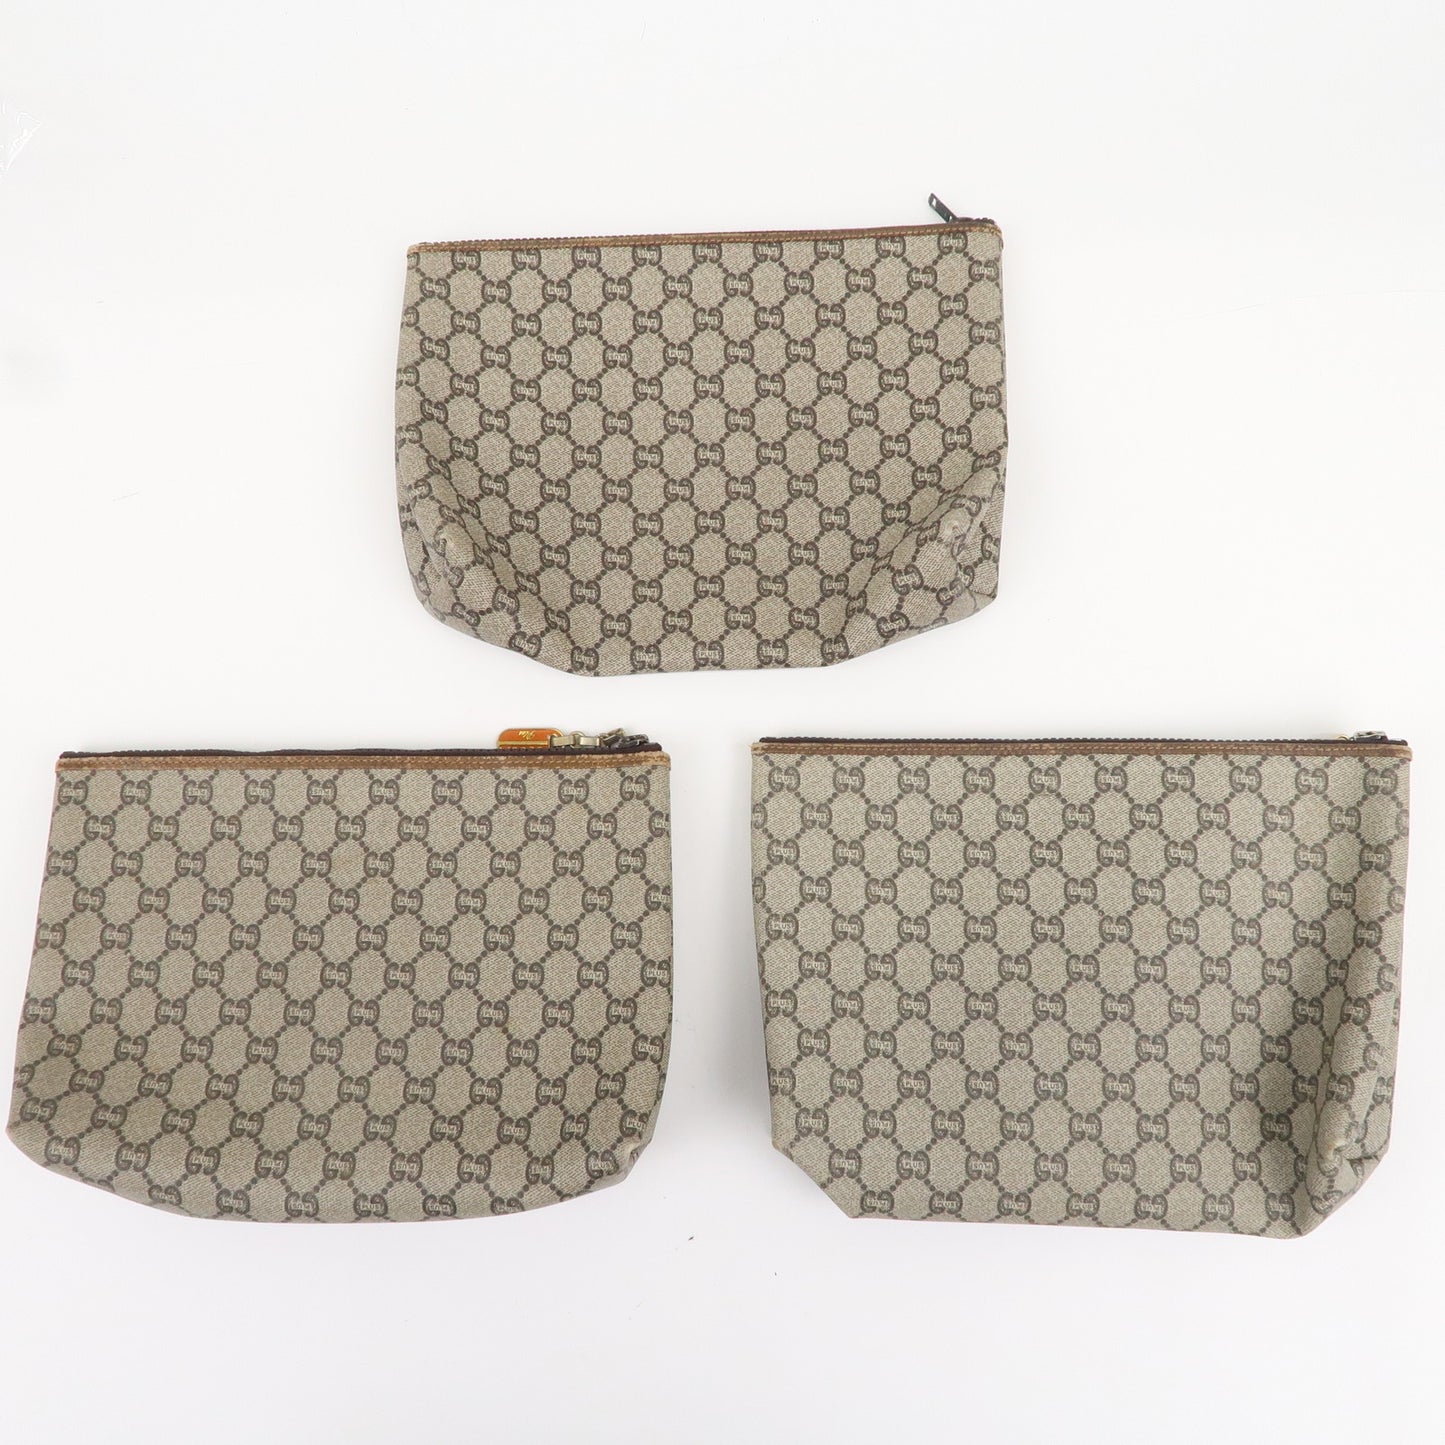 GUCCI Set of 3 Old Gucci Leather Second Bag Pouch Beige Brown